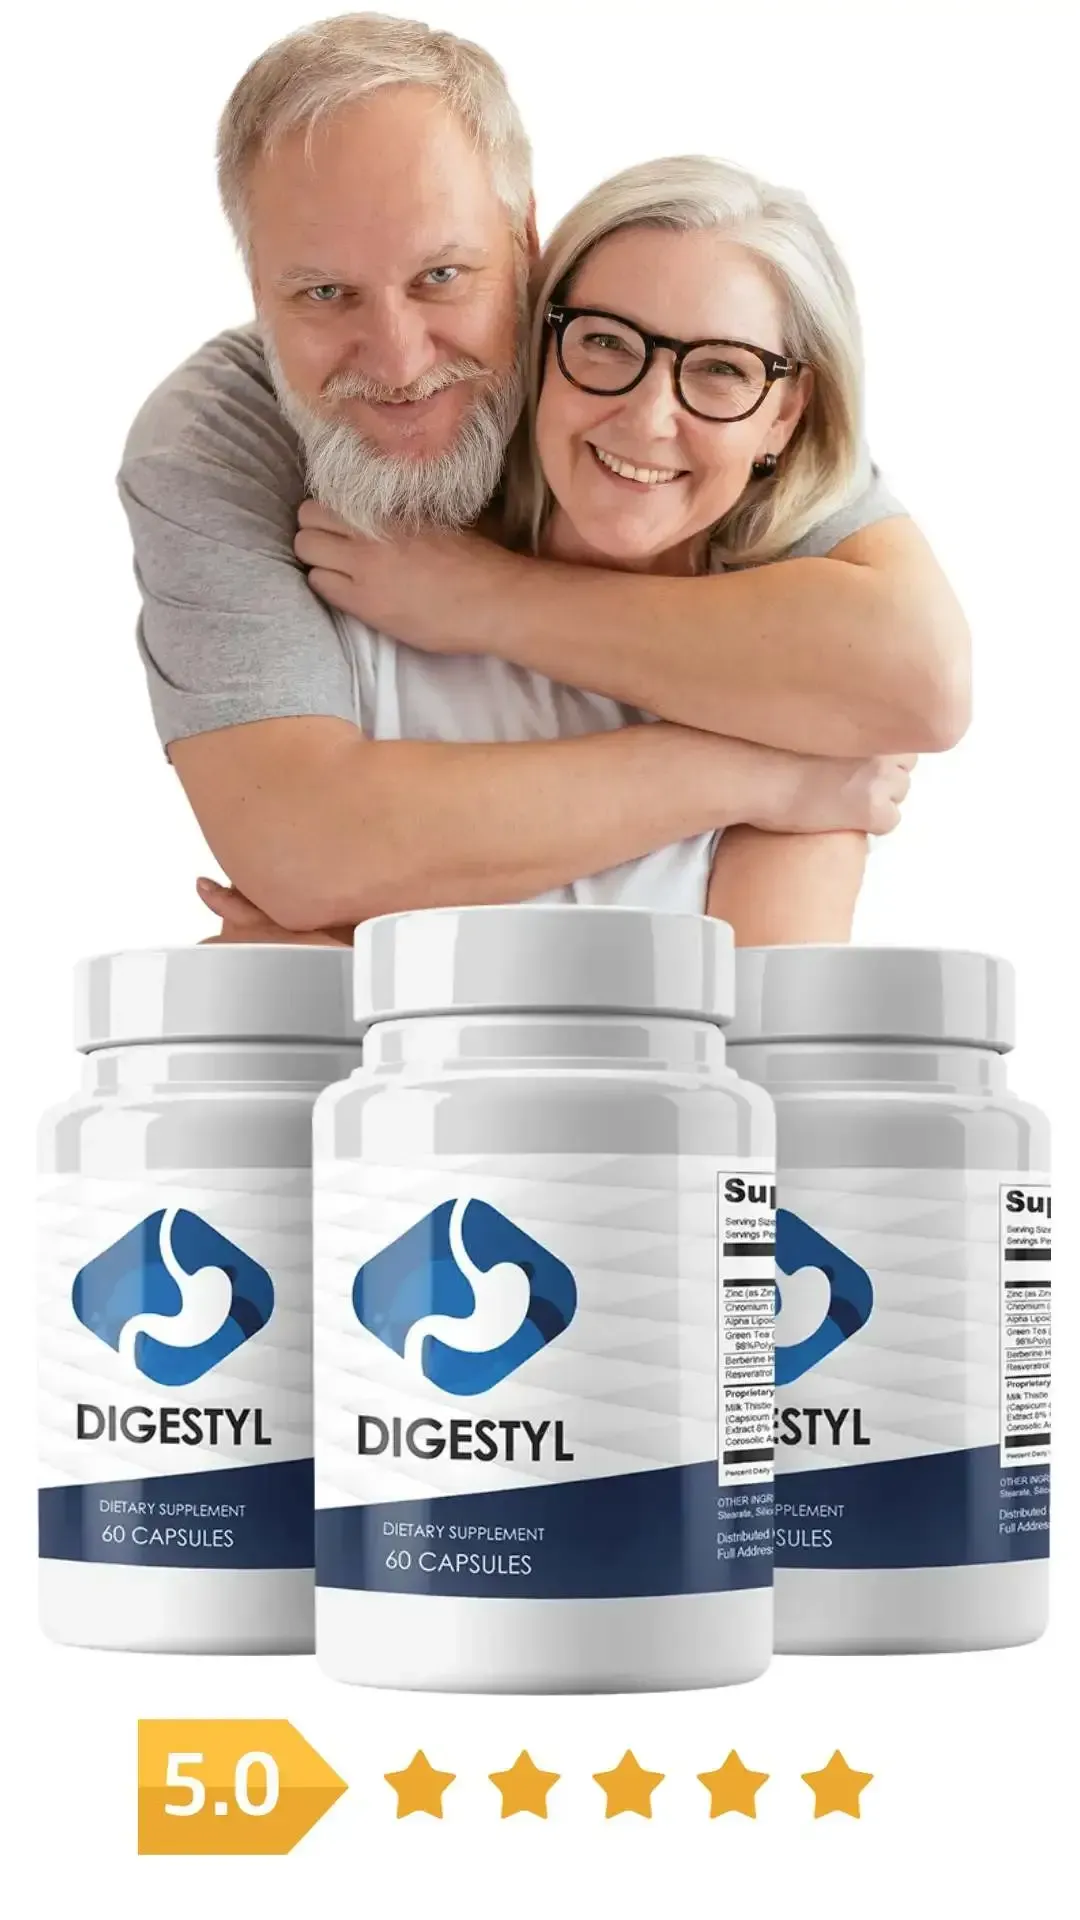 What is Digestyl